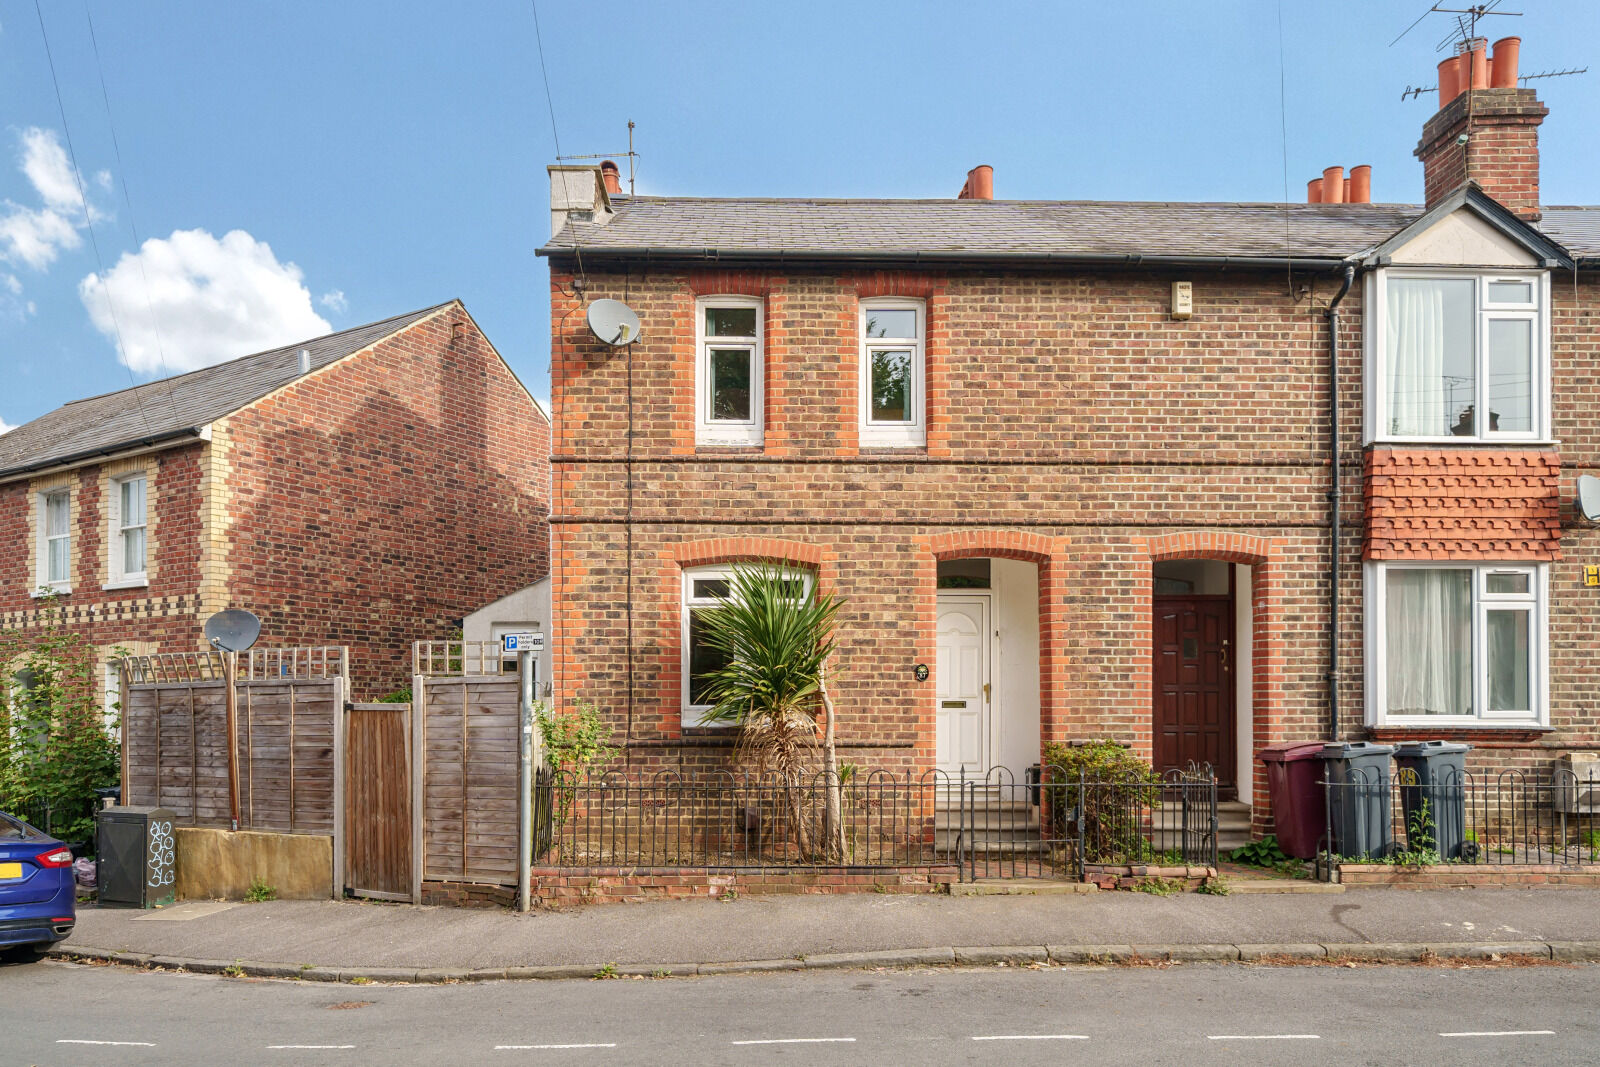 2 bedroom mid terraced house for sale Alpine Street, Reading, RG1, main image